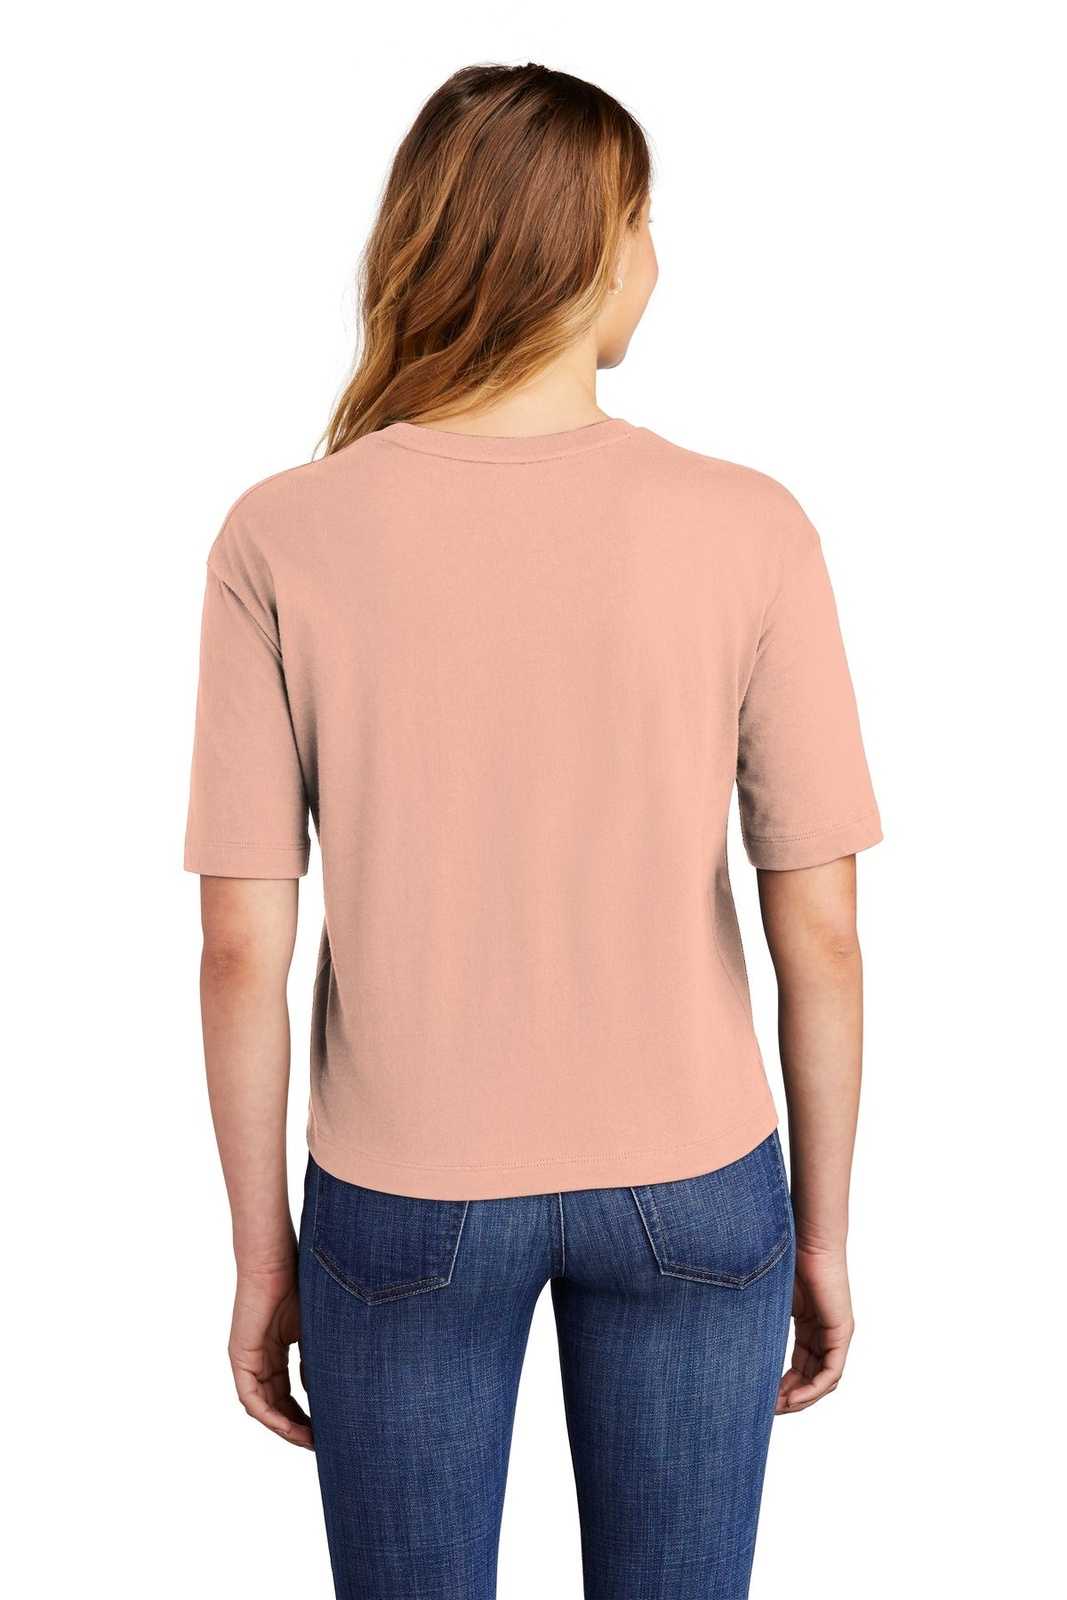 District DT6402 Women's V.I.T. Boxy Tee - Dusty Peach - HIT a Double - 1